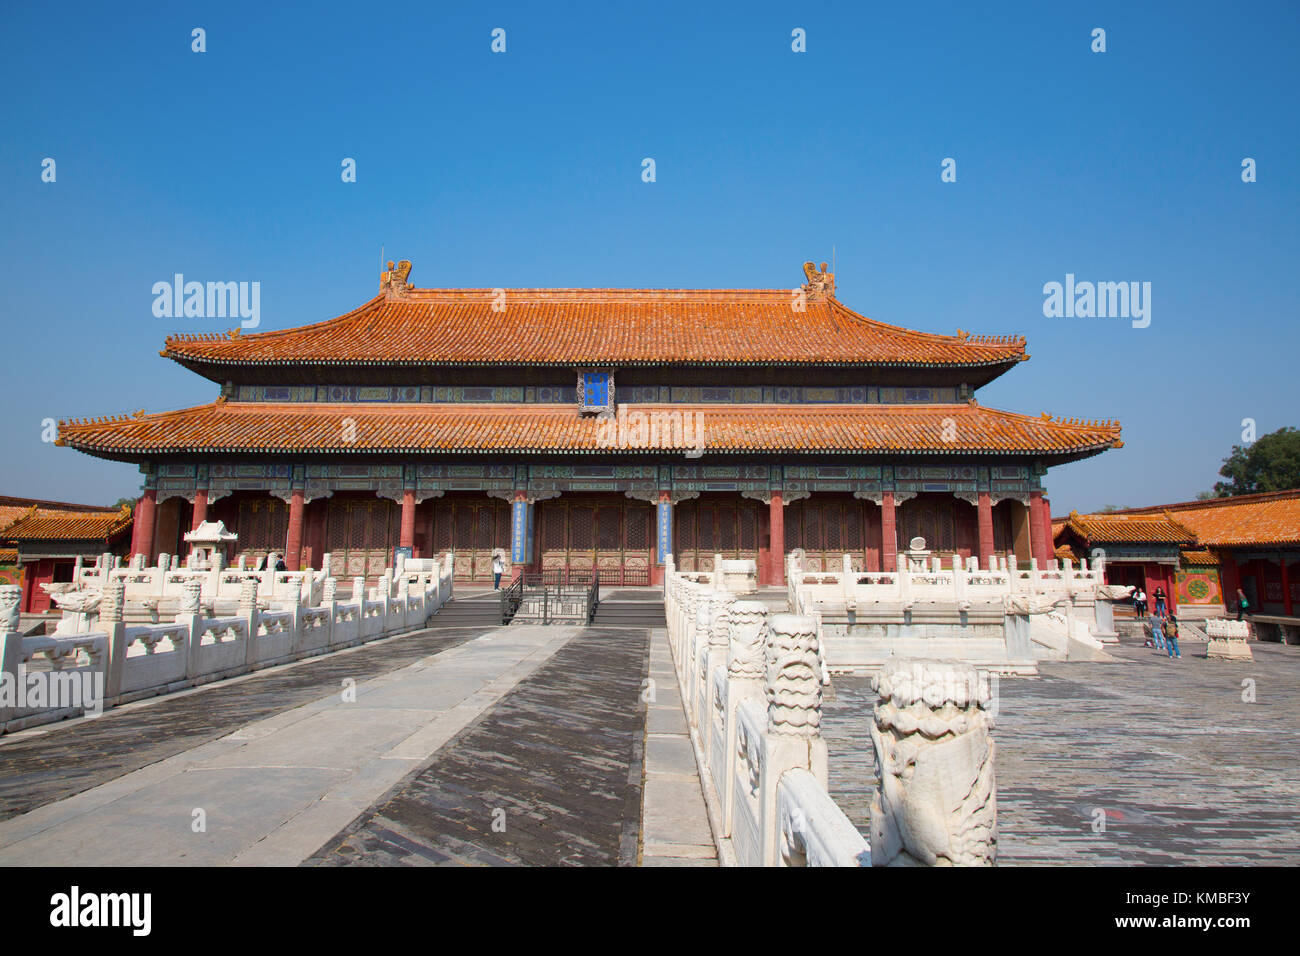 The Forbidden City (Palace museum), the Chinese imperial palace from the Ming dynasty to the end of the Qing dynasty (1420 to 1912). Stock Photo